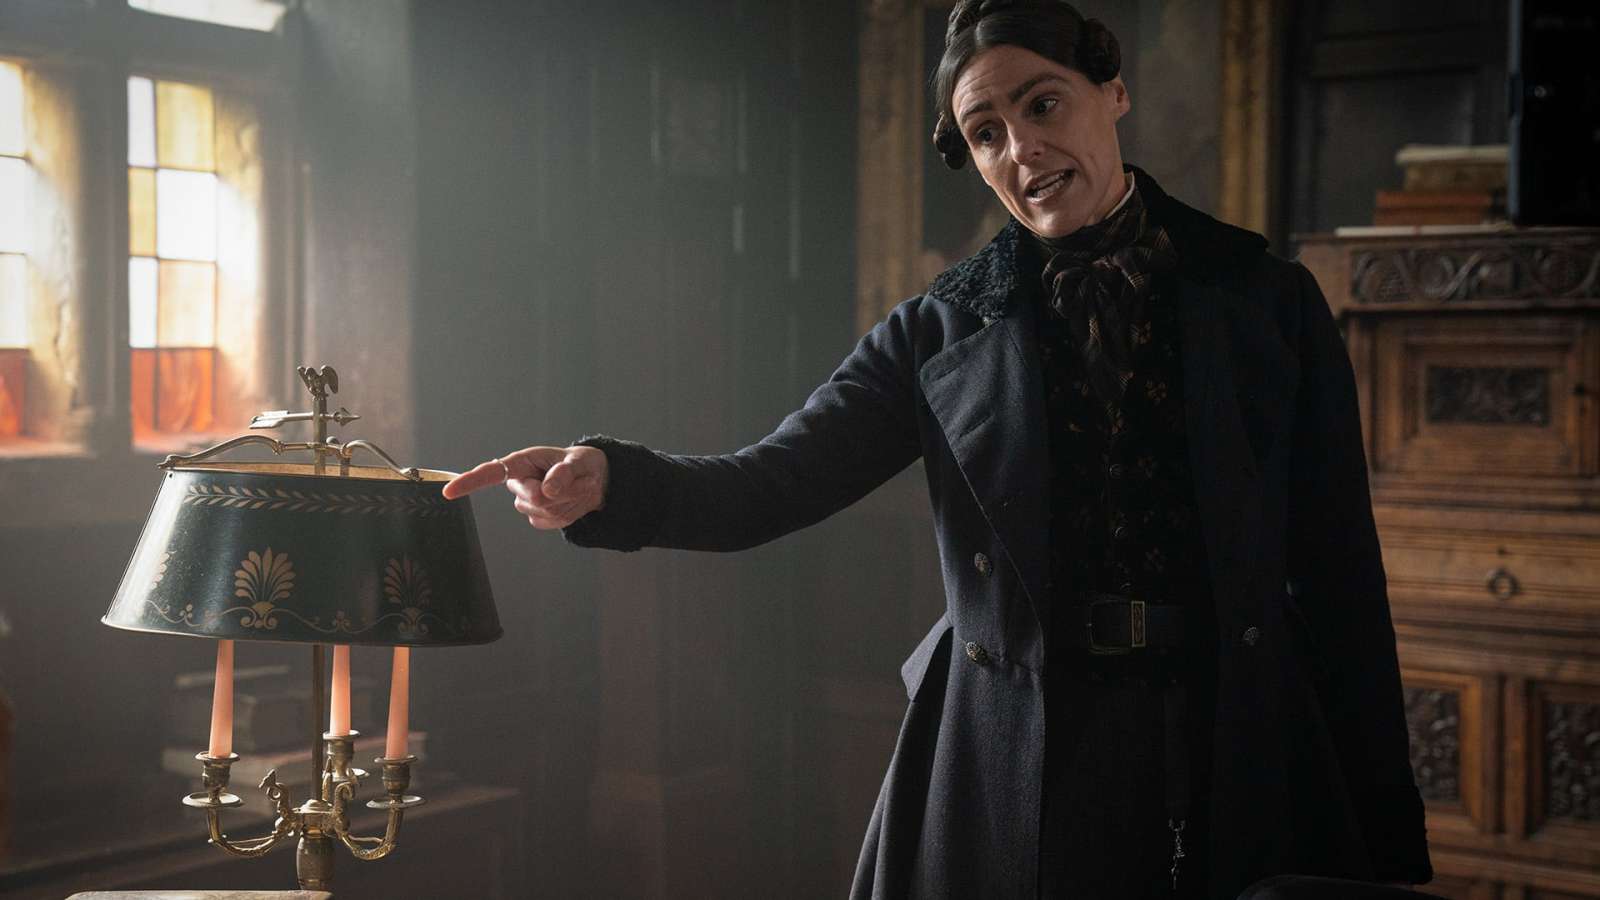 Gentleman Jack : What's All That Got to Do with Jesus Though?